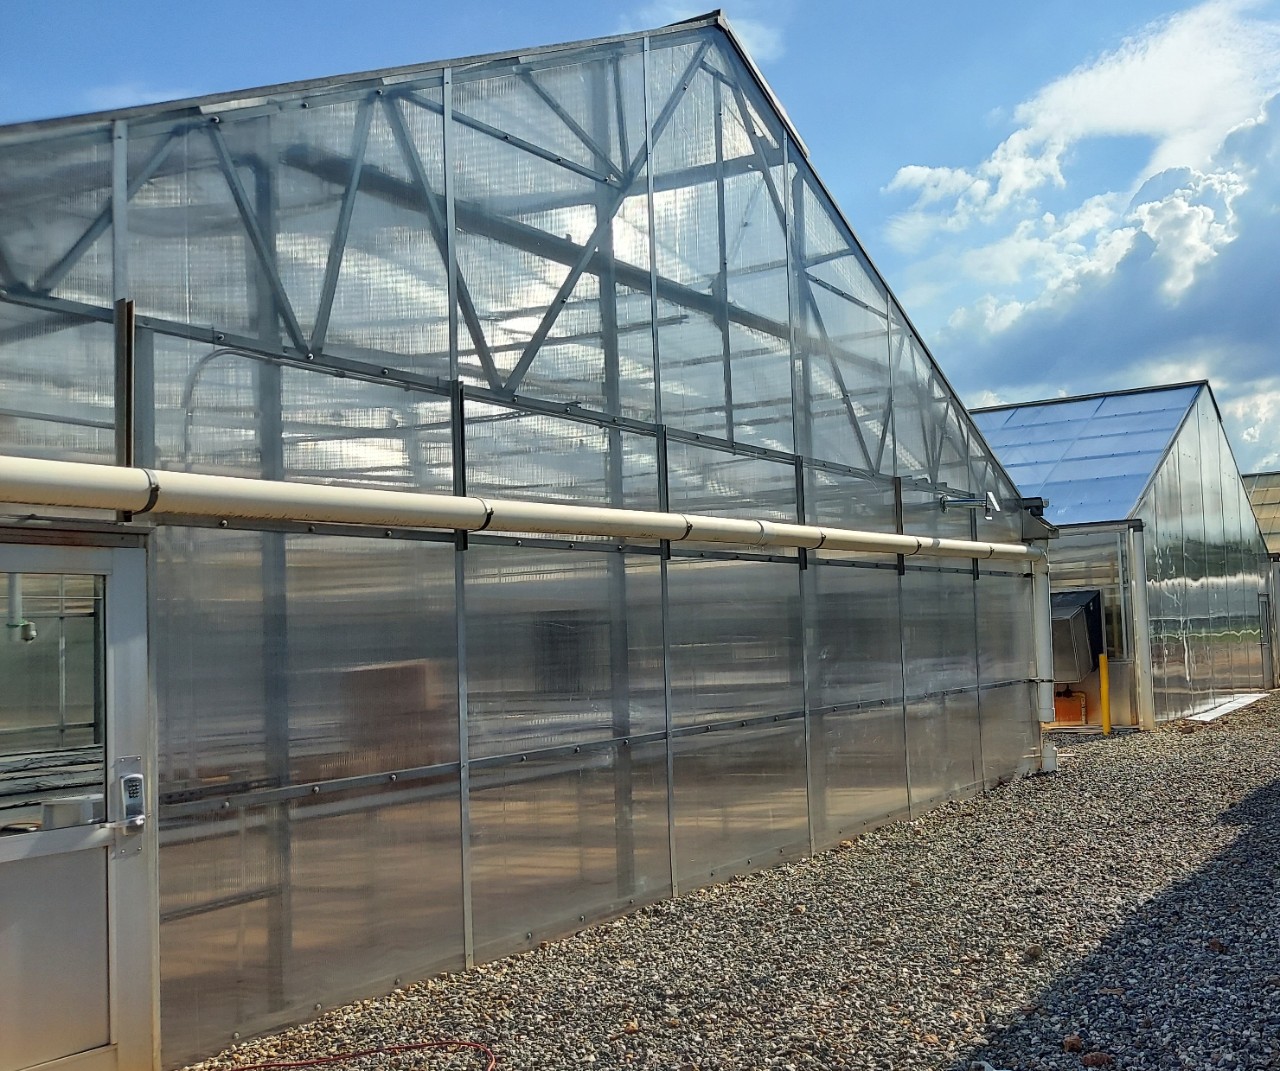 South Milledge Greenhouses following the replacement of old polycarbonate panels.